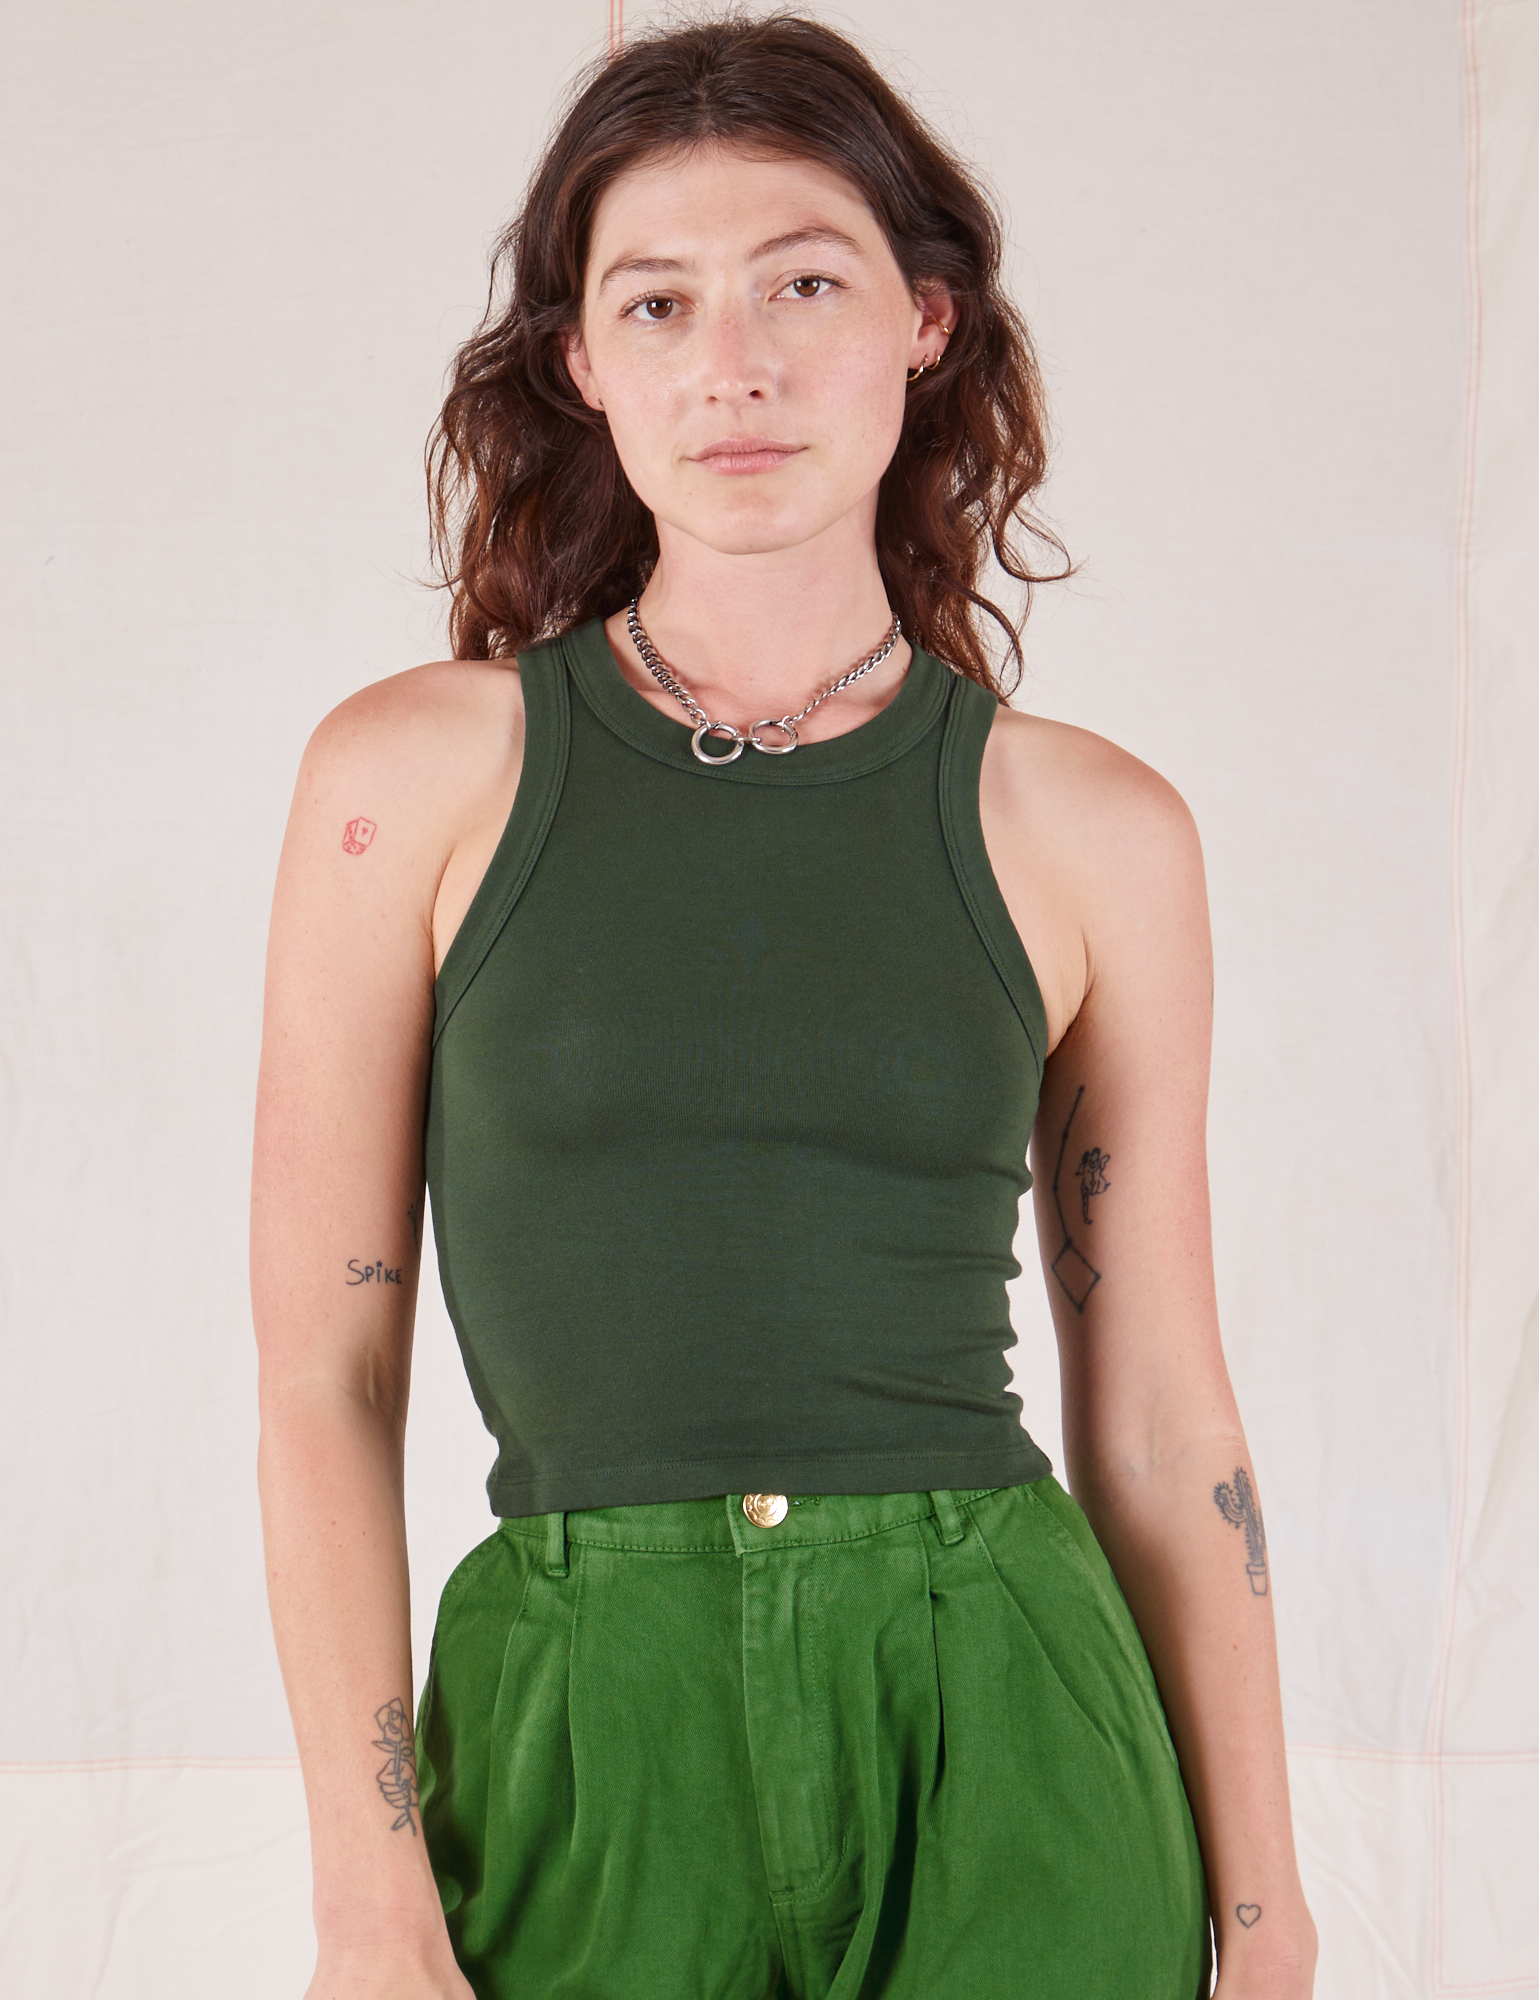 Alex is 5’8” and wearing P Racerback Tank in Swamp Green